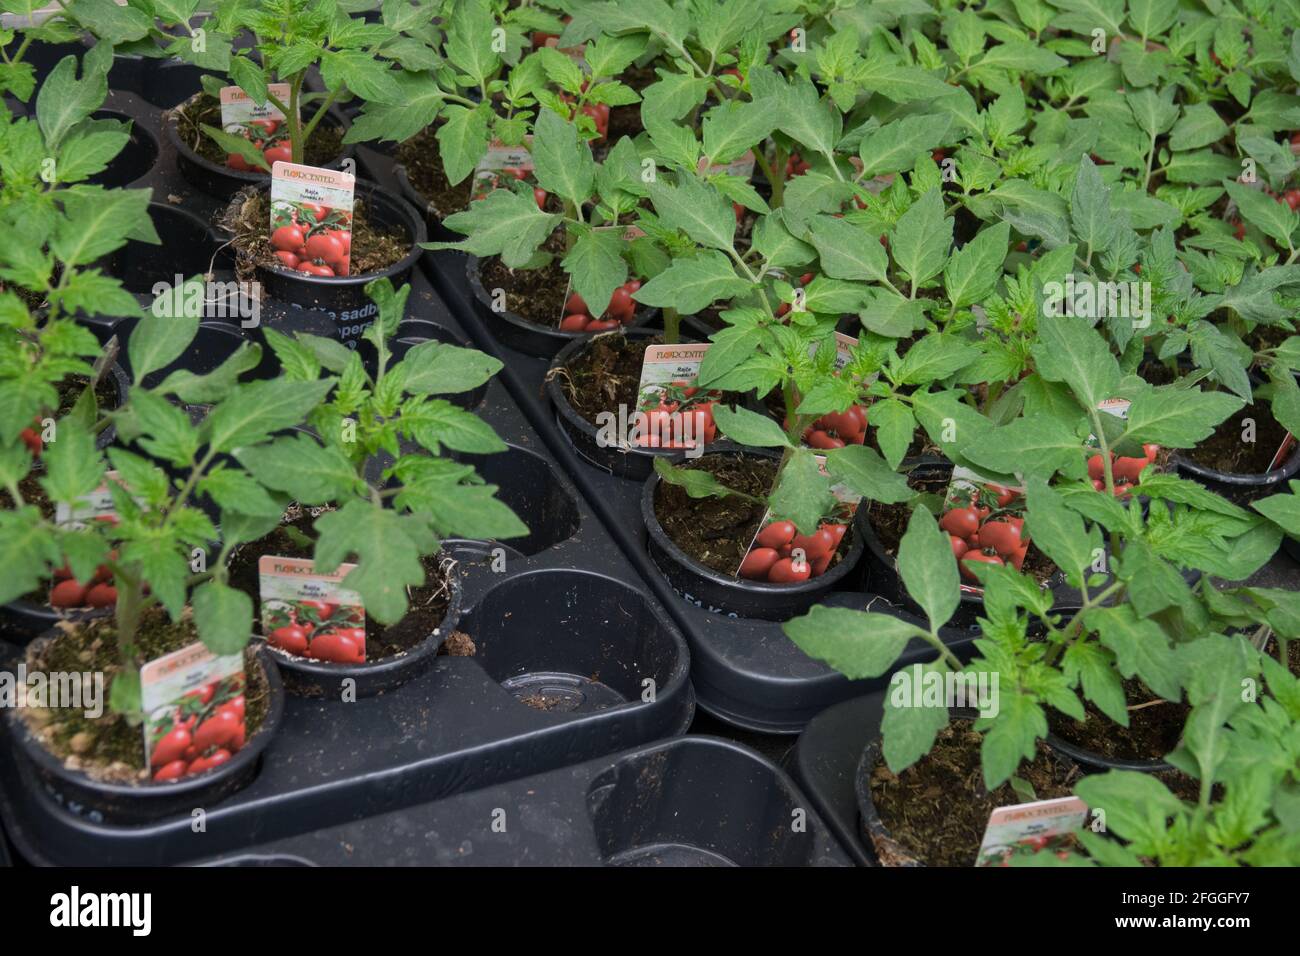 Tomatoes seedlings in pots Tomato 'Tornado' for sale in a garden centre,  pots tomatoes Stock Photo